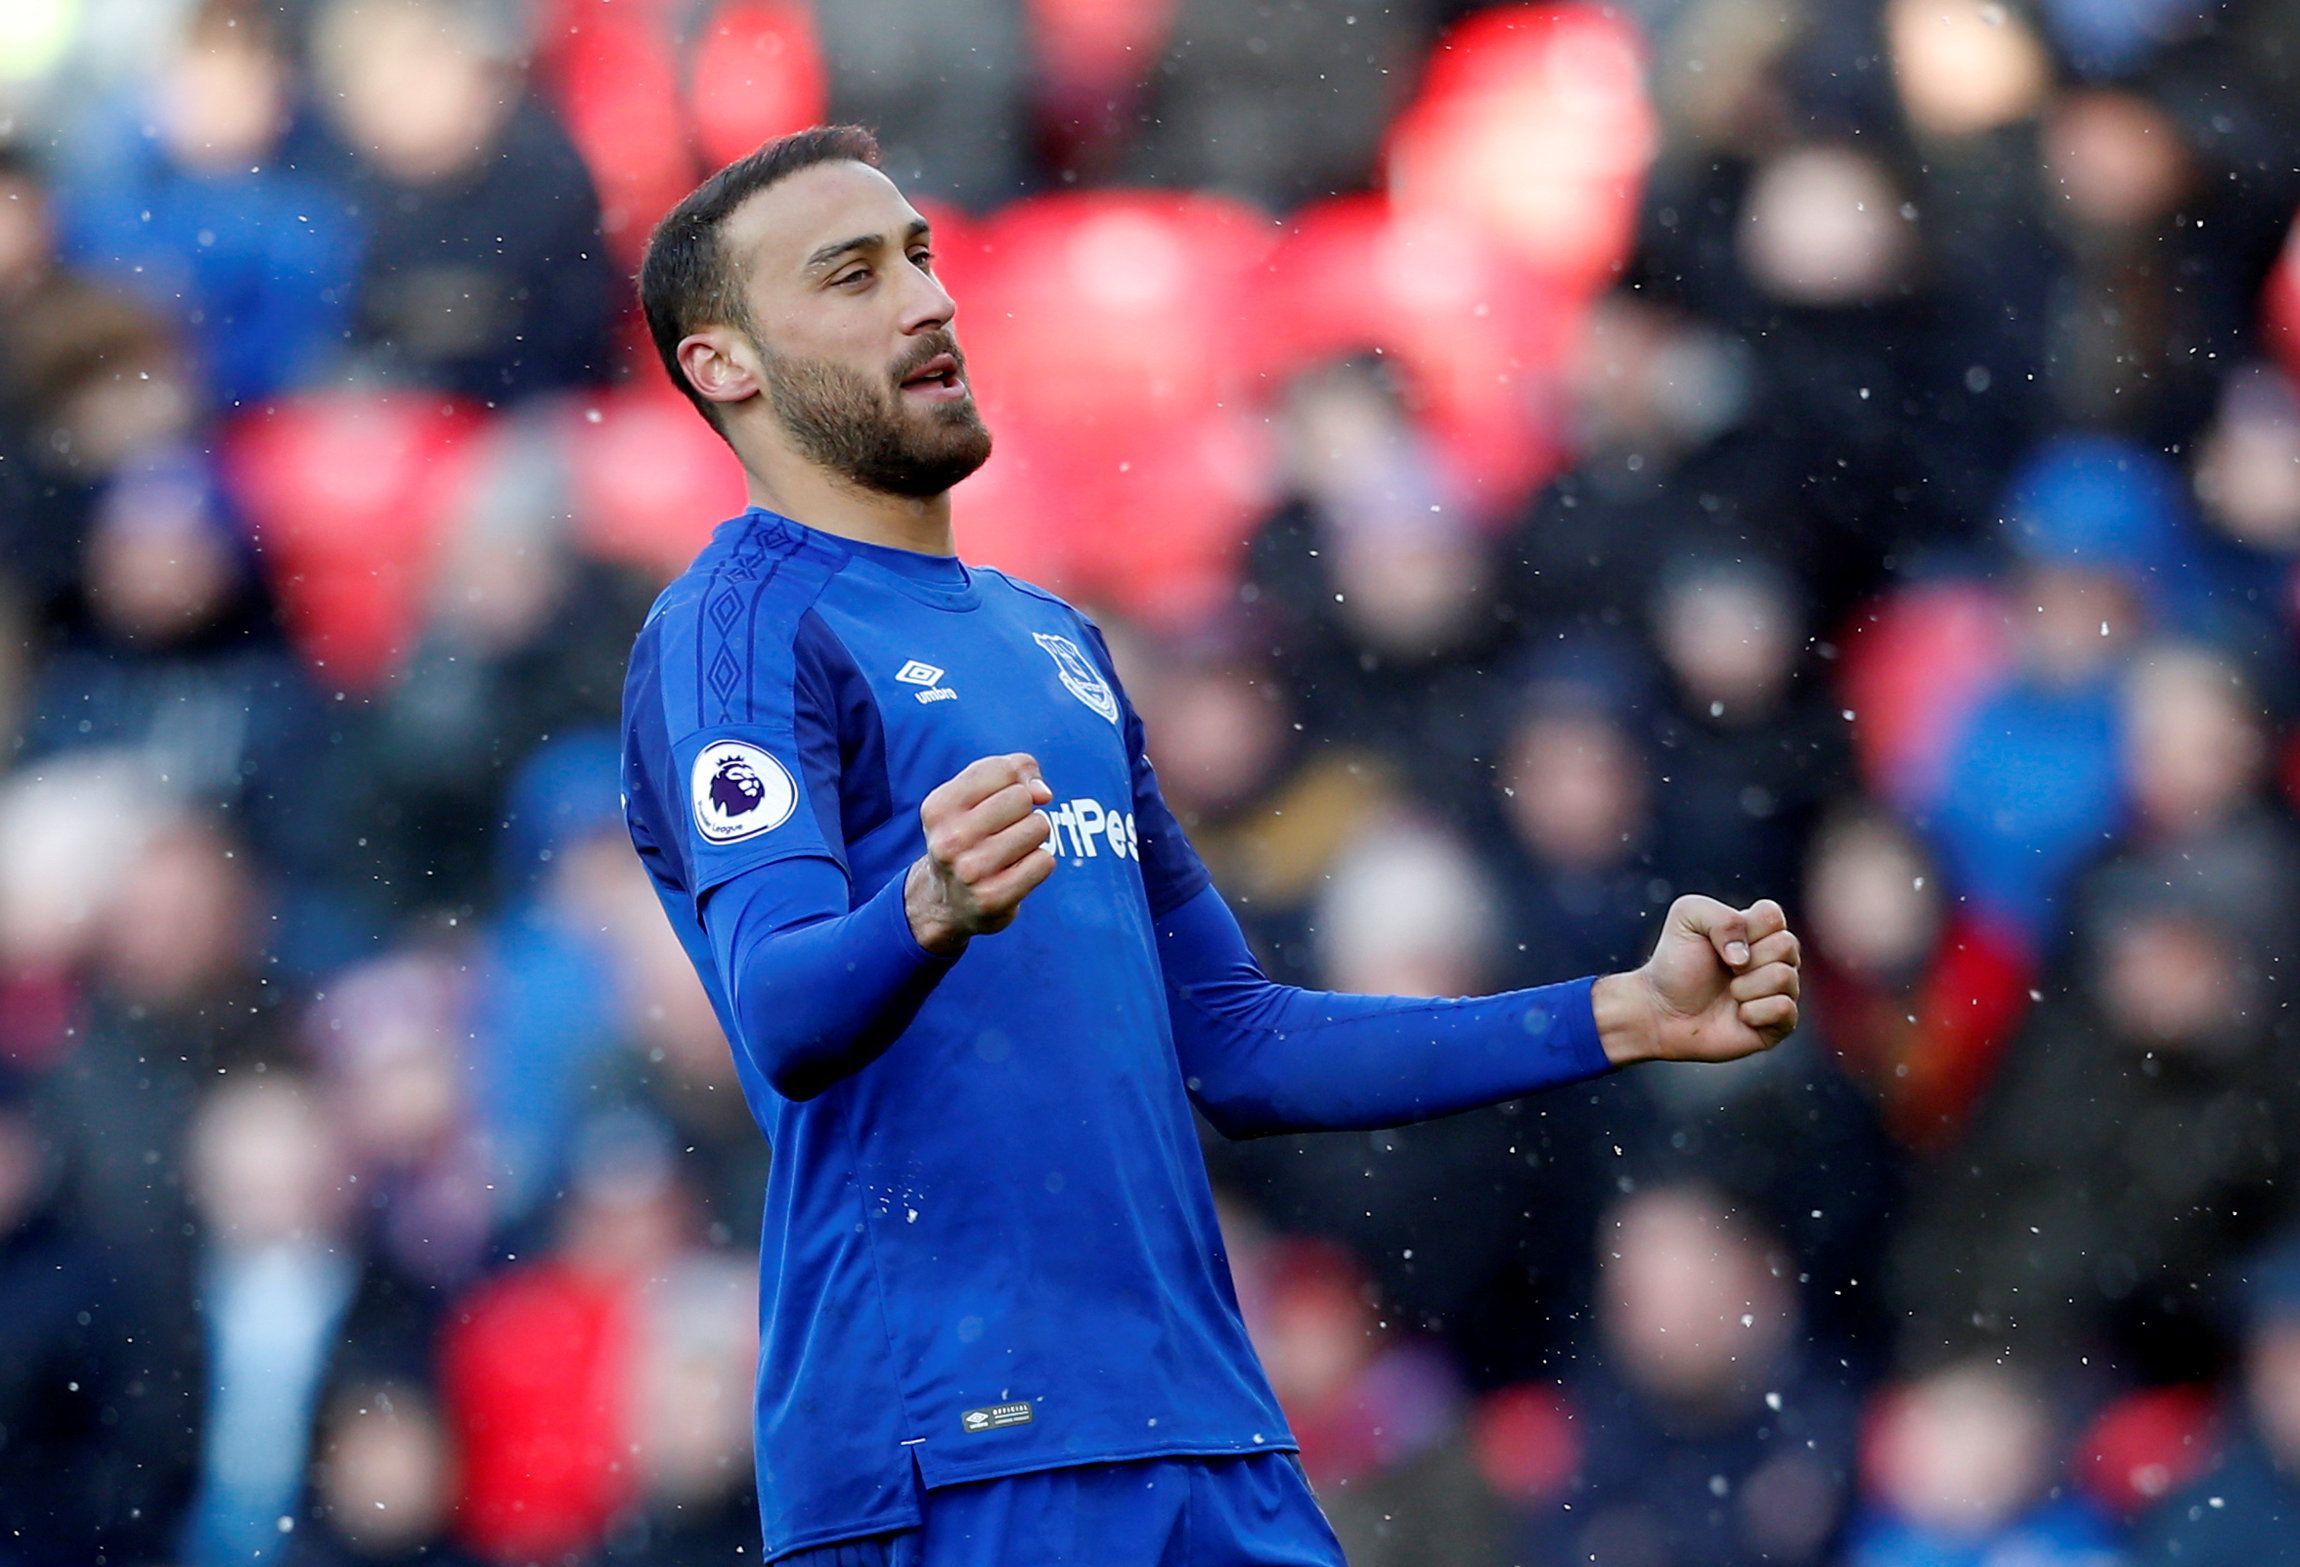 Soccer Football - Premier League - Stoke City vs Everton - bet365 Stadium, Stoke-on-Trent, Britain - March 17, 2018   Everton's Cenk Tosun celebrates scoring their second goal                 Action Images via Reuters/Ed Sykes    EDITORIAL USE ONLY. No use with unauthorized audio, video, data, fixture lists, club/league logos or 